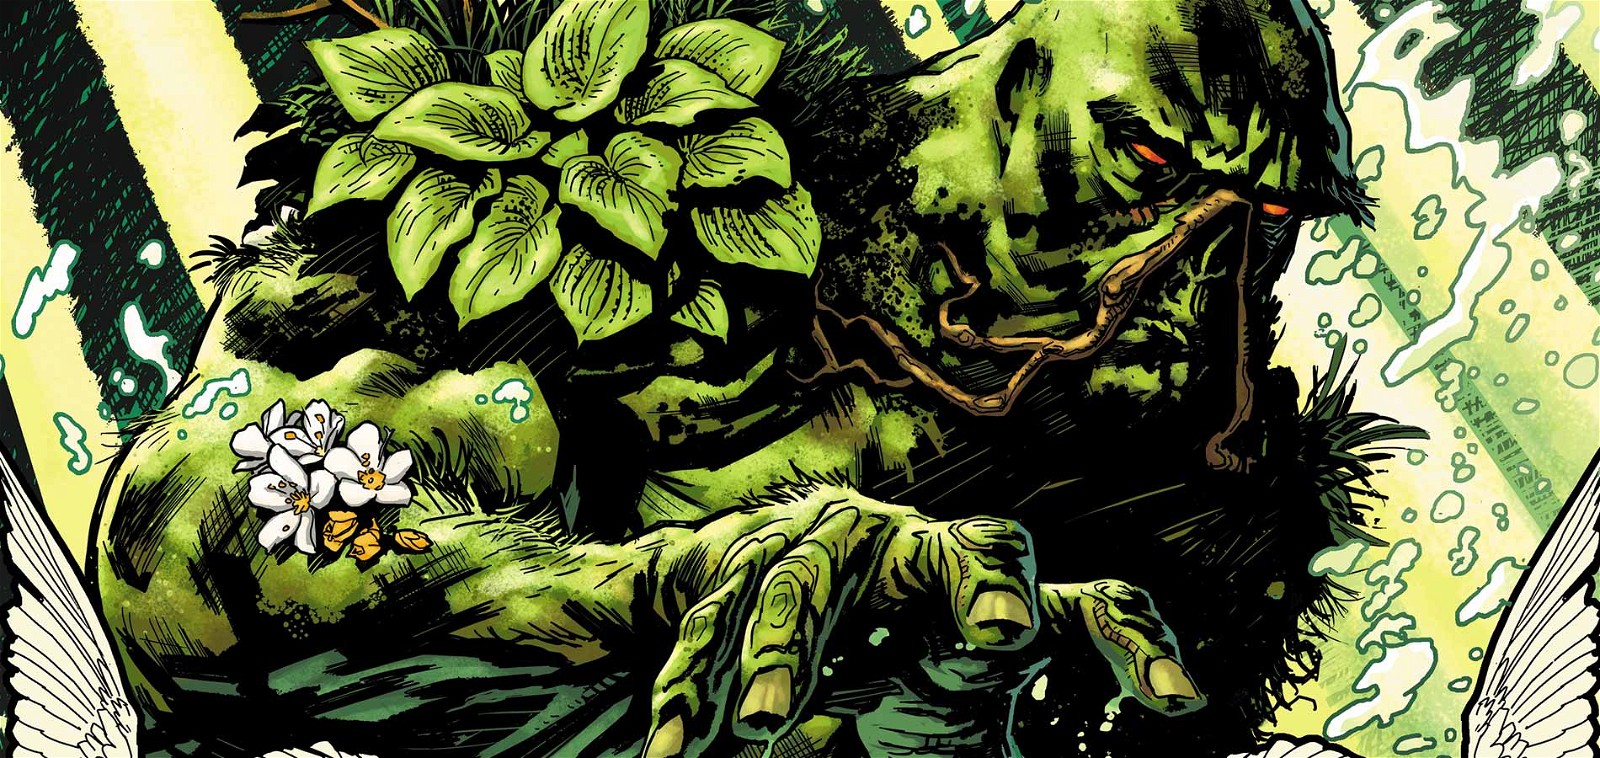 Swamp Thing movie finally at works in DC